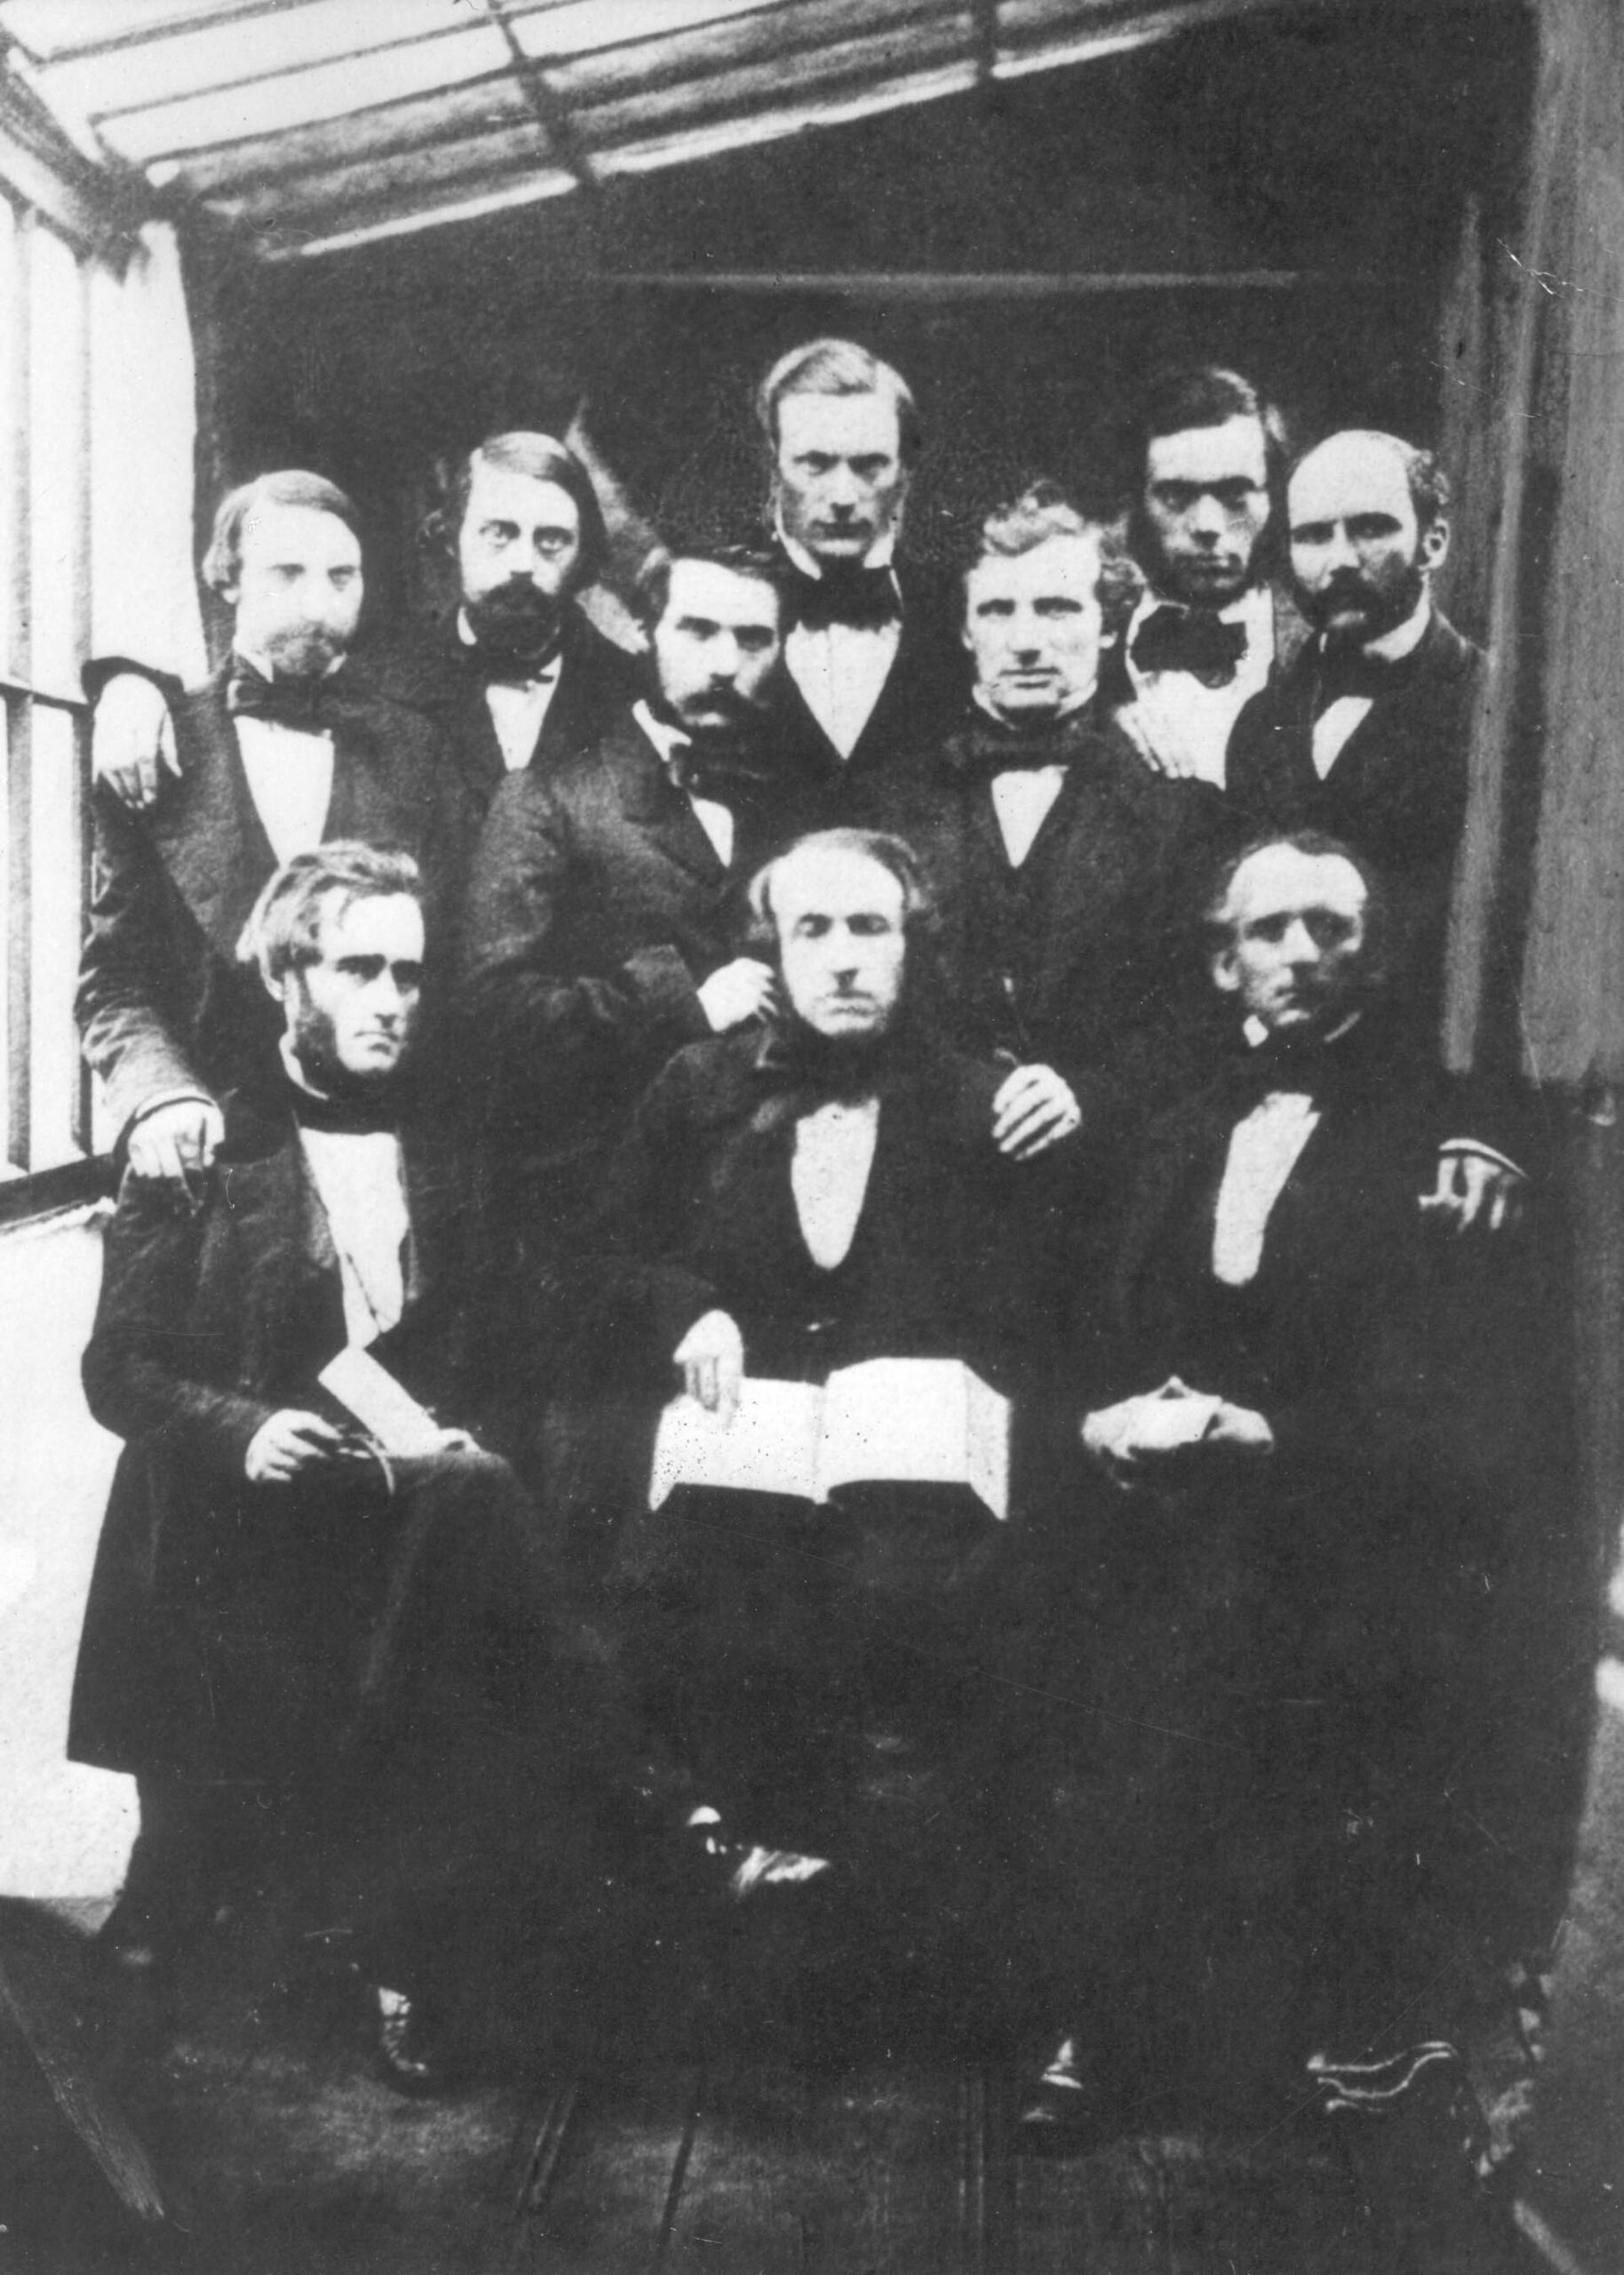 1855 Paris 99 delegates from 9 countries, all under 25. George Williams at front centre, Henri Dunant standing 3rd from left